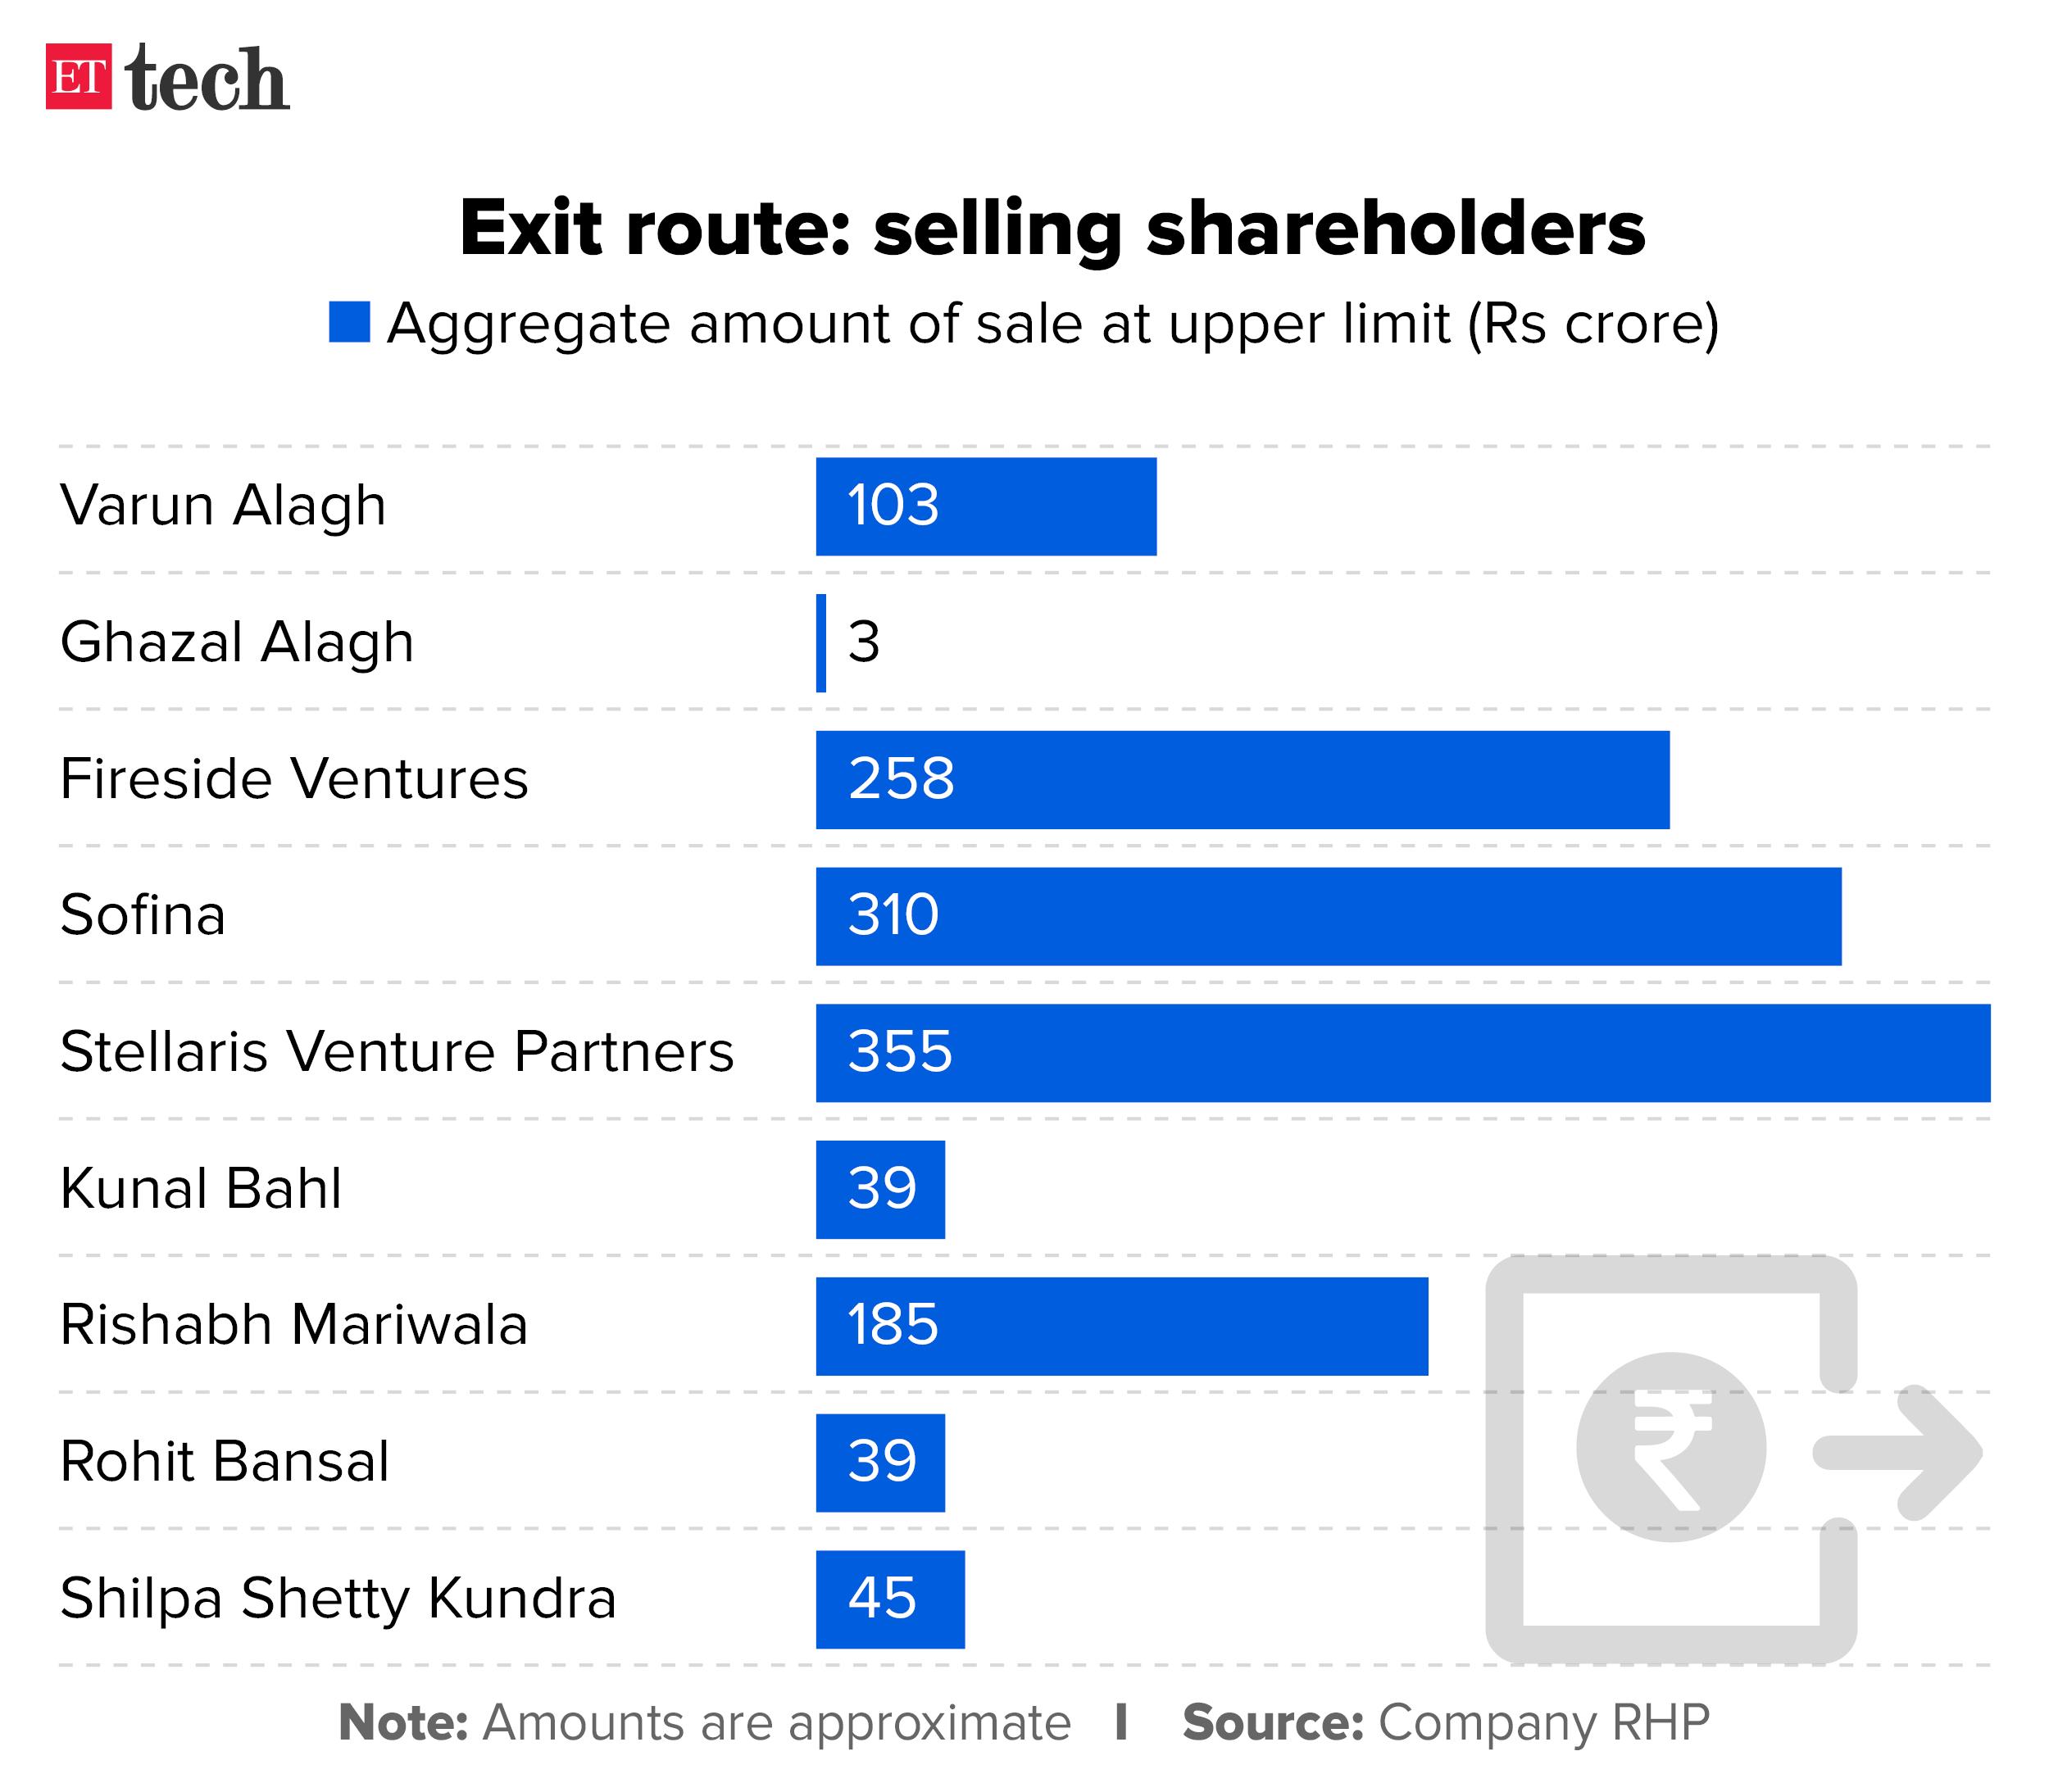 Exit route selling shareholders